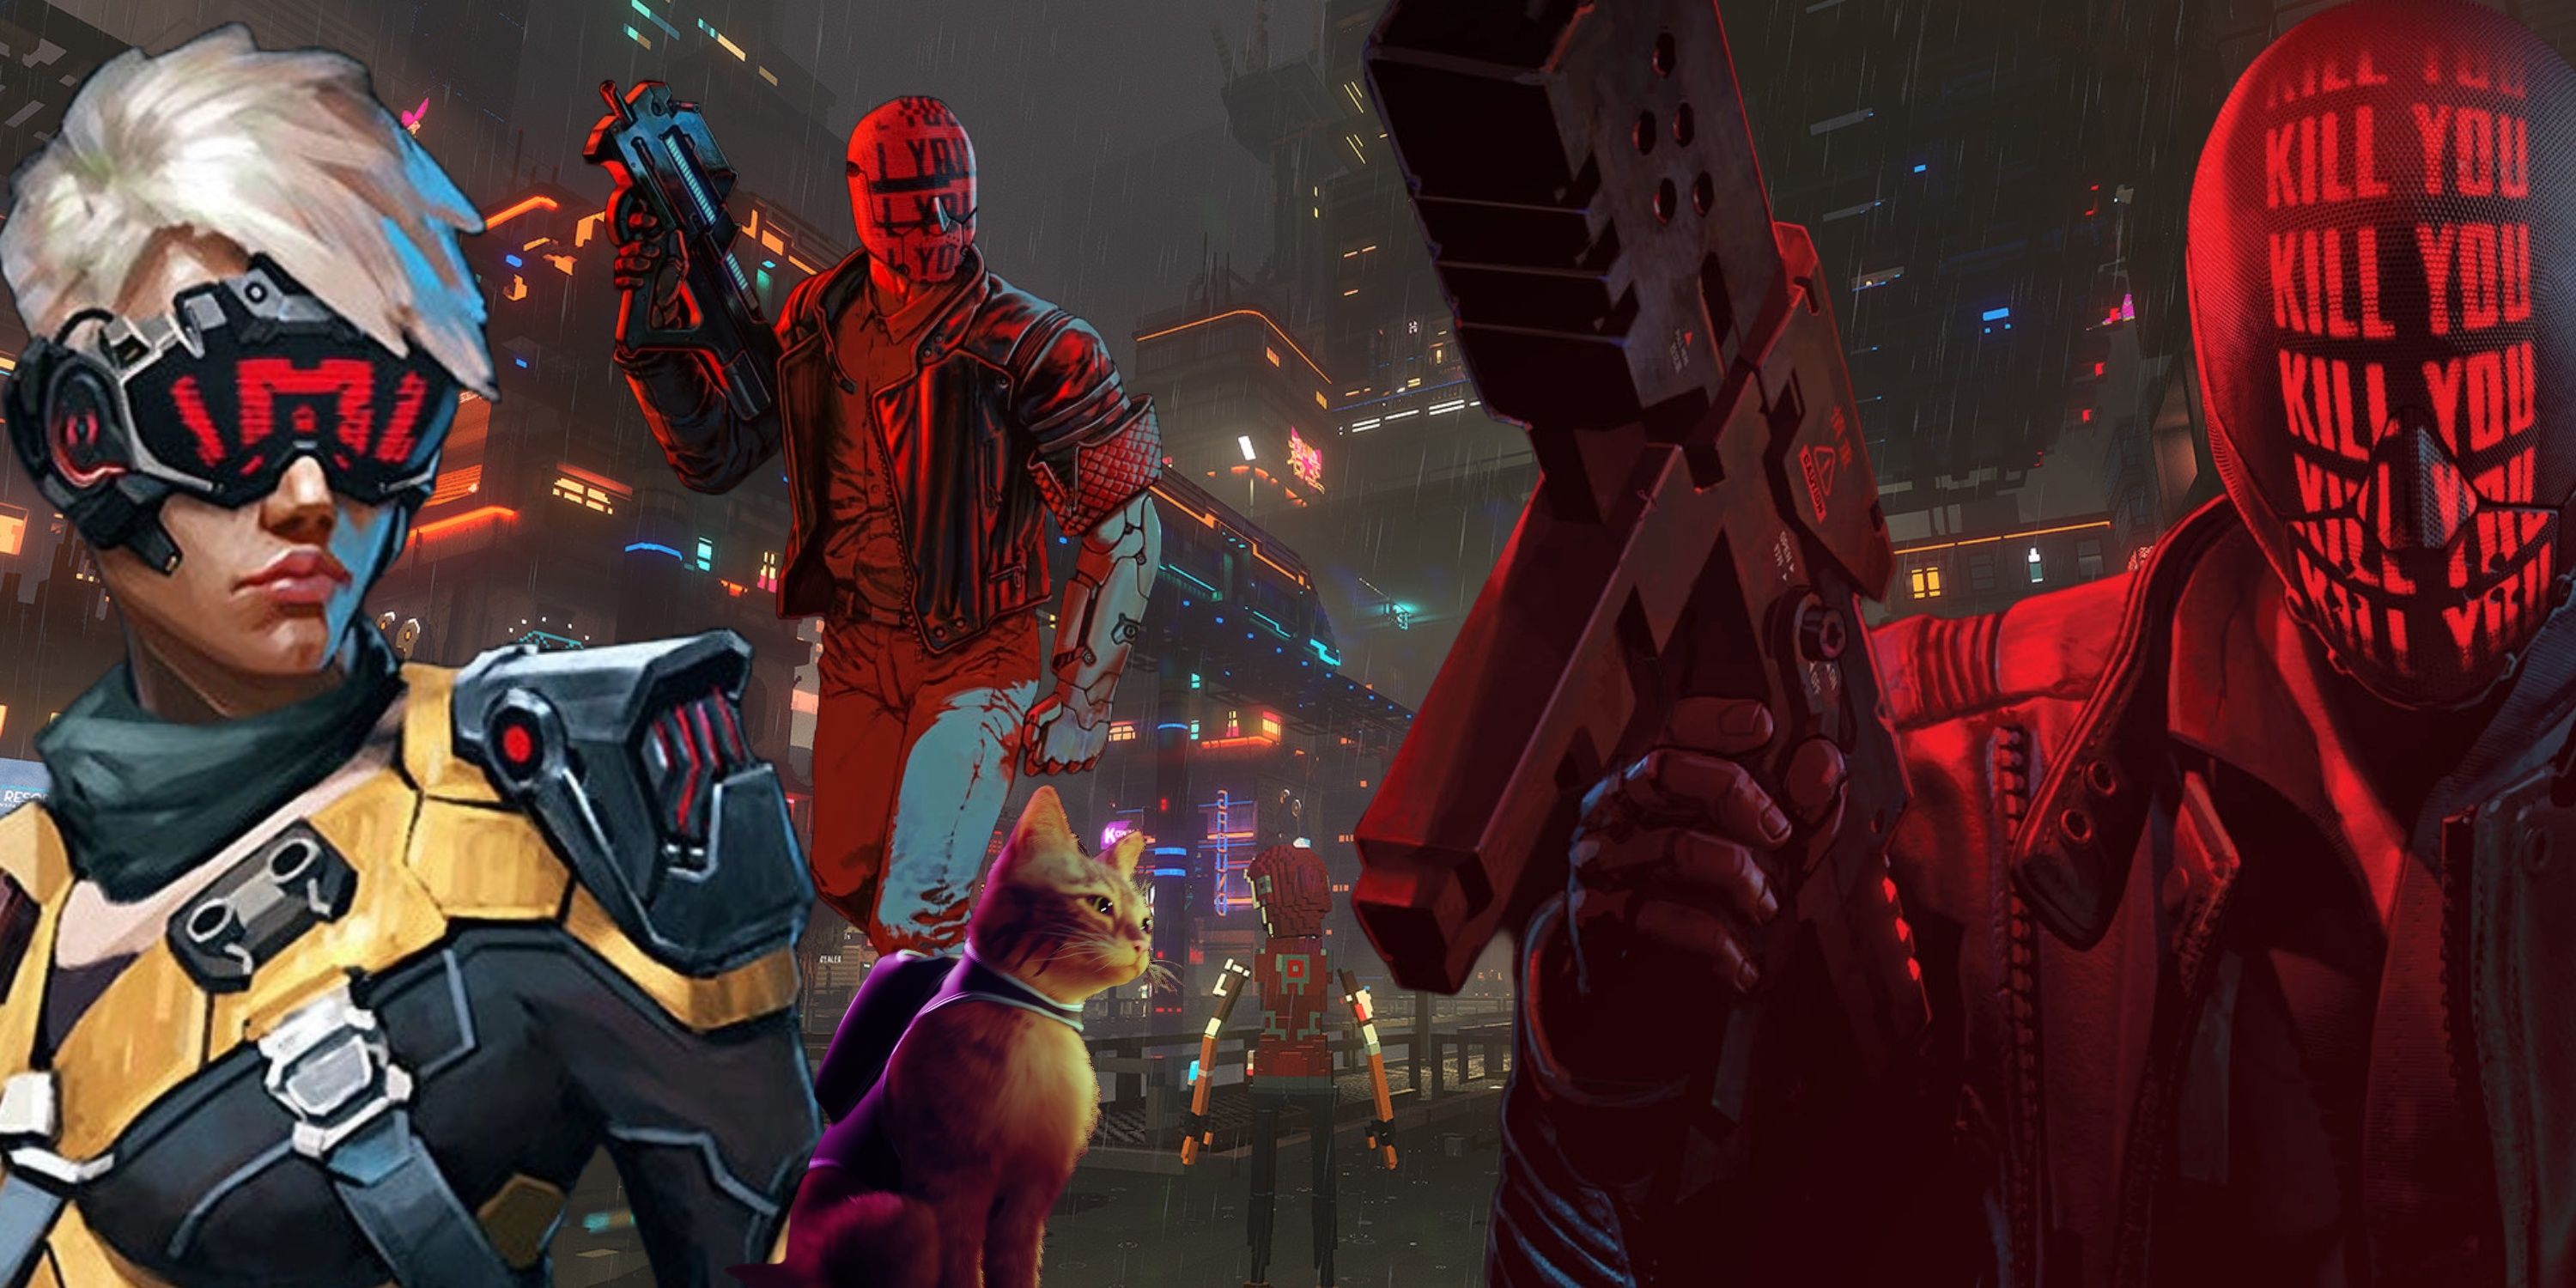 Best Indie Cyberpunk Games (Featured Image) - Cyber Knights + Stray + RUINER + Cloudpunk